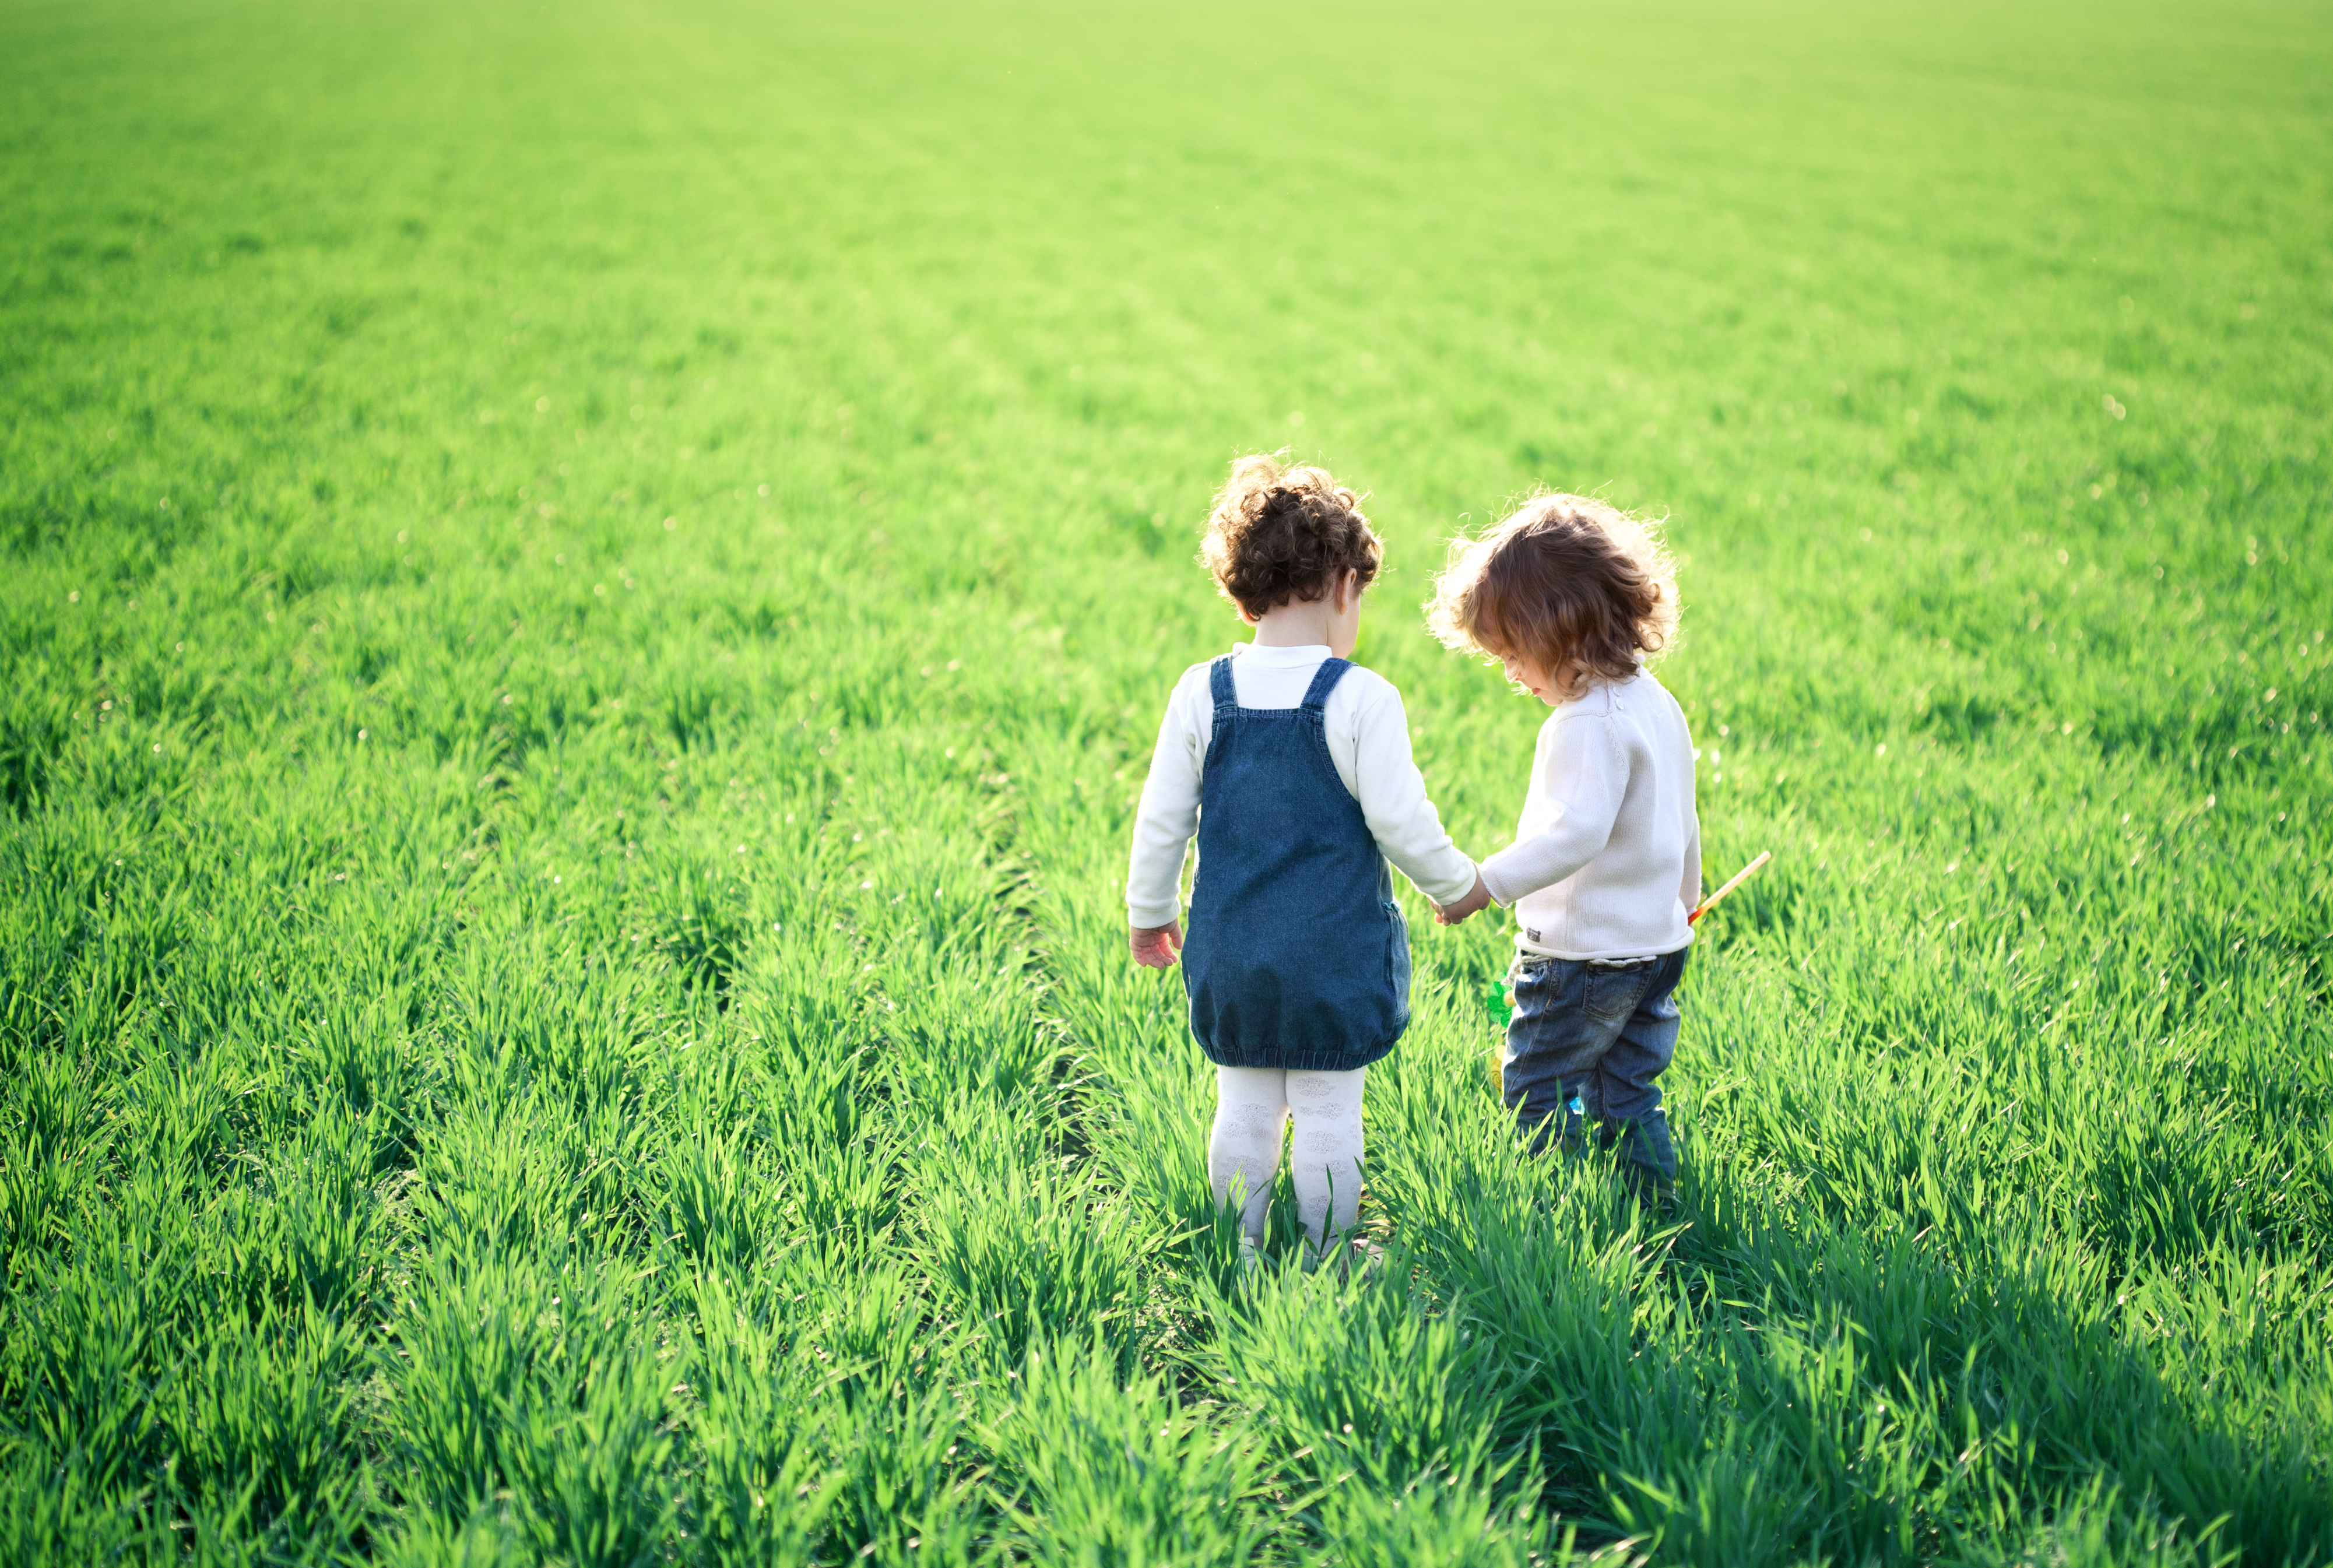 Children Holding Hands in a field representing walking eachother home